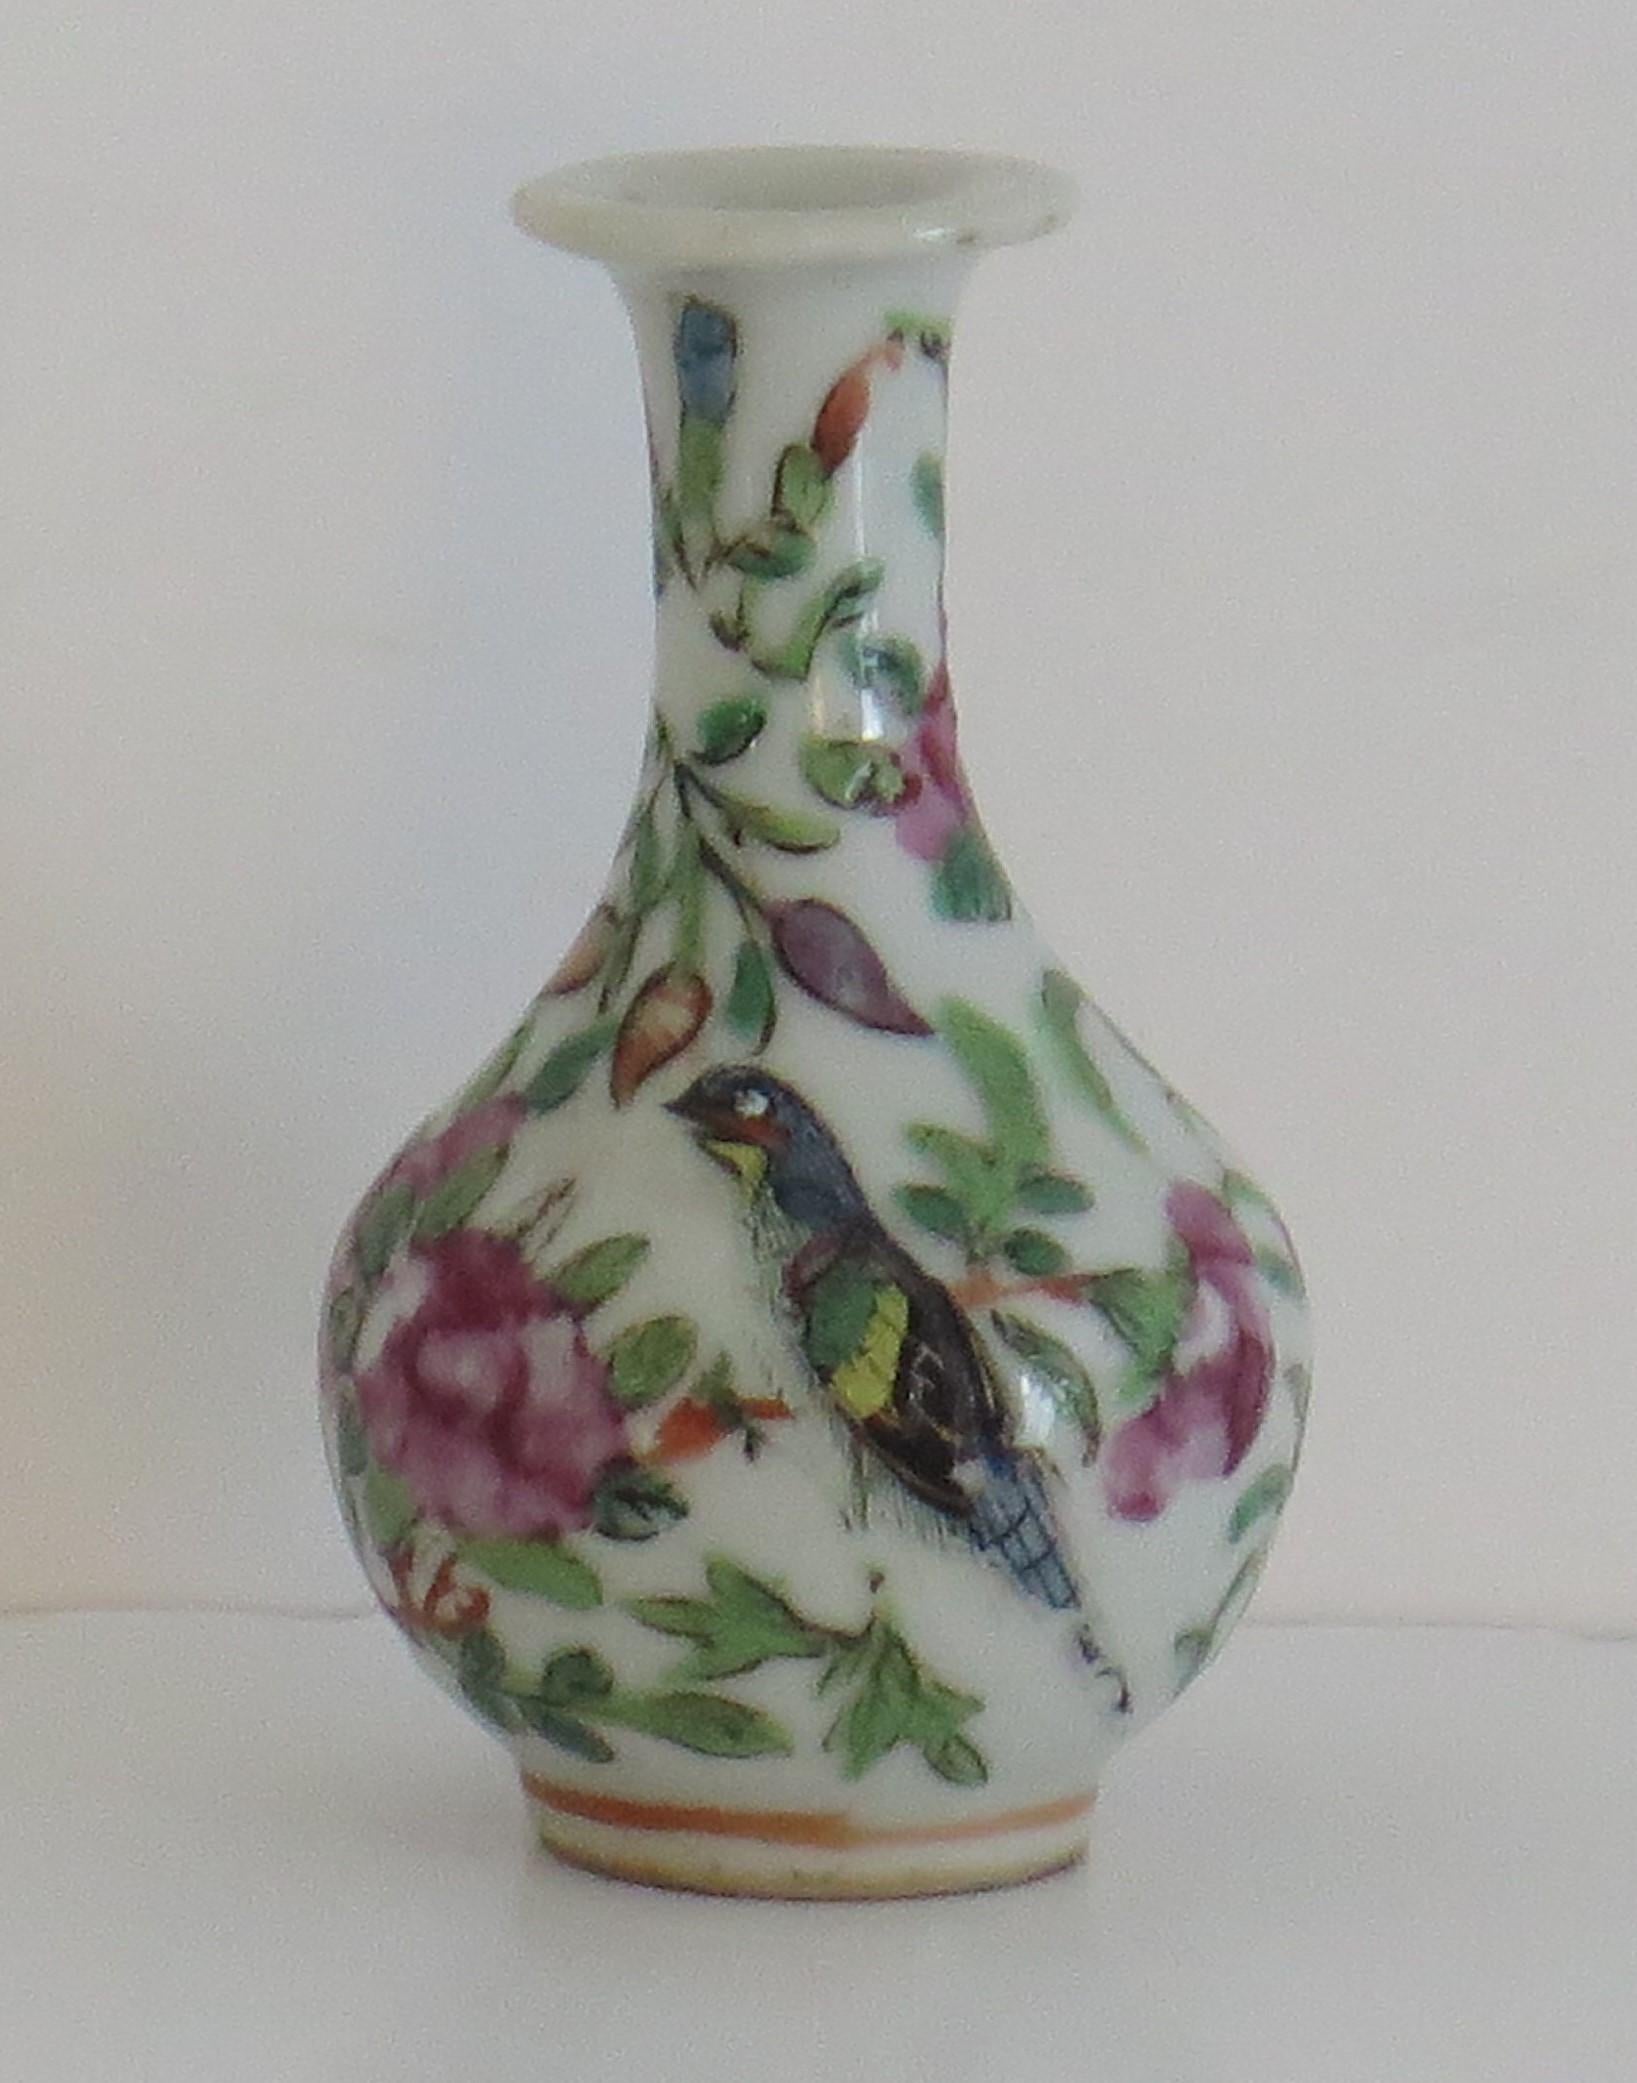 This is a good, decorative Chinese export, Imperial Canton, porcelain, Famille Rose, Small or Bud Vase which we date to the mid-19th century, Qing dynasty, circa 1850.

The vase has a good baluster shape with a tall neck and everted rim, 

It is